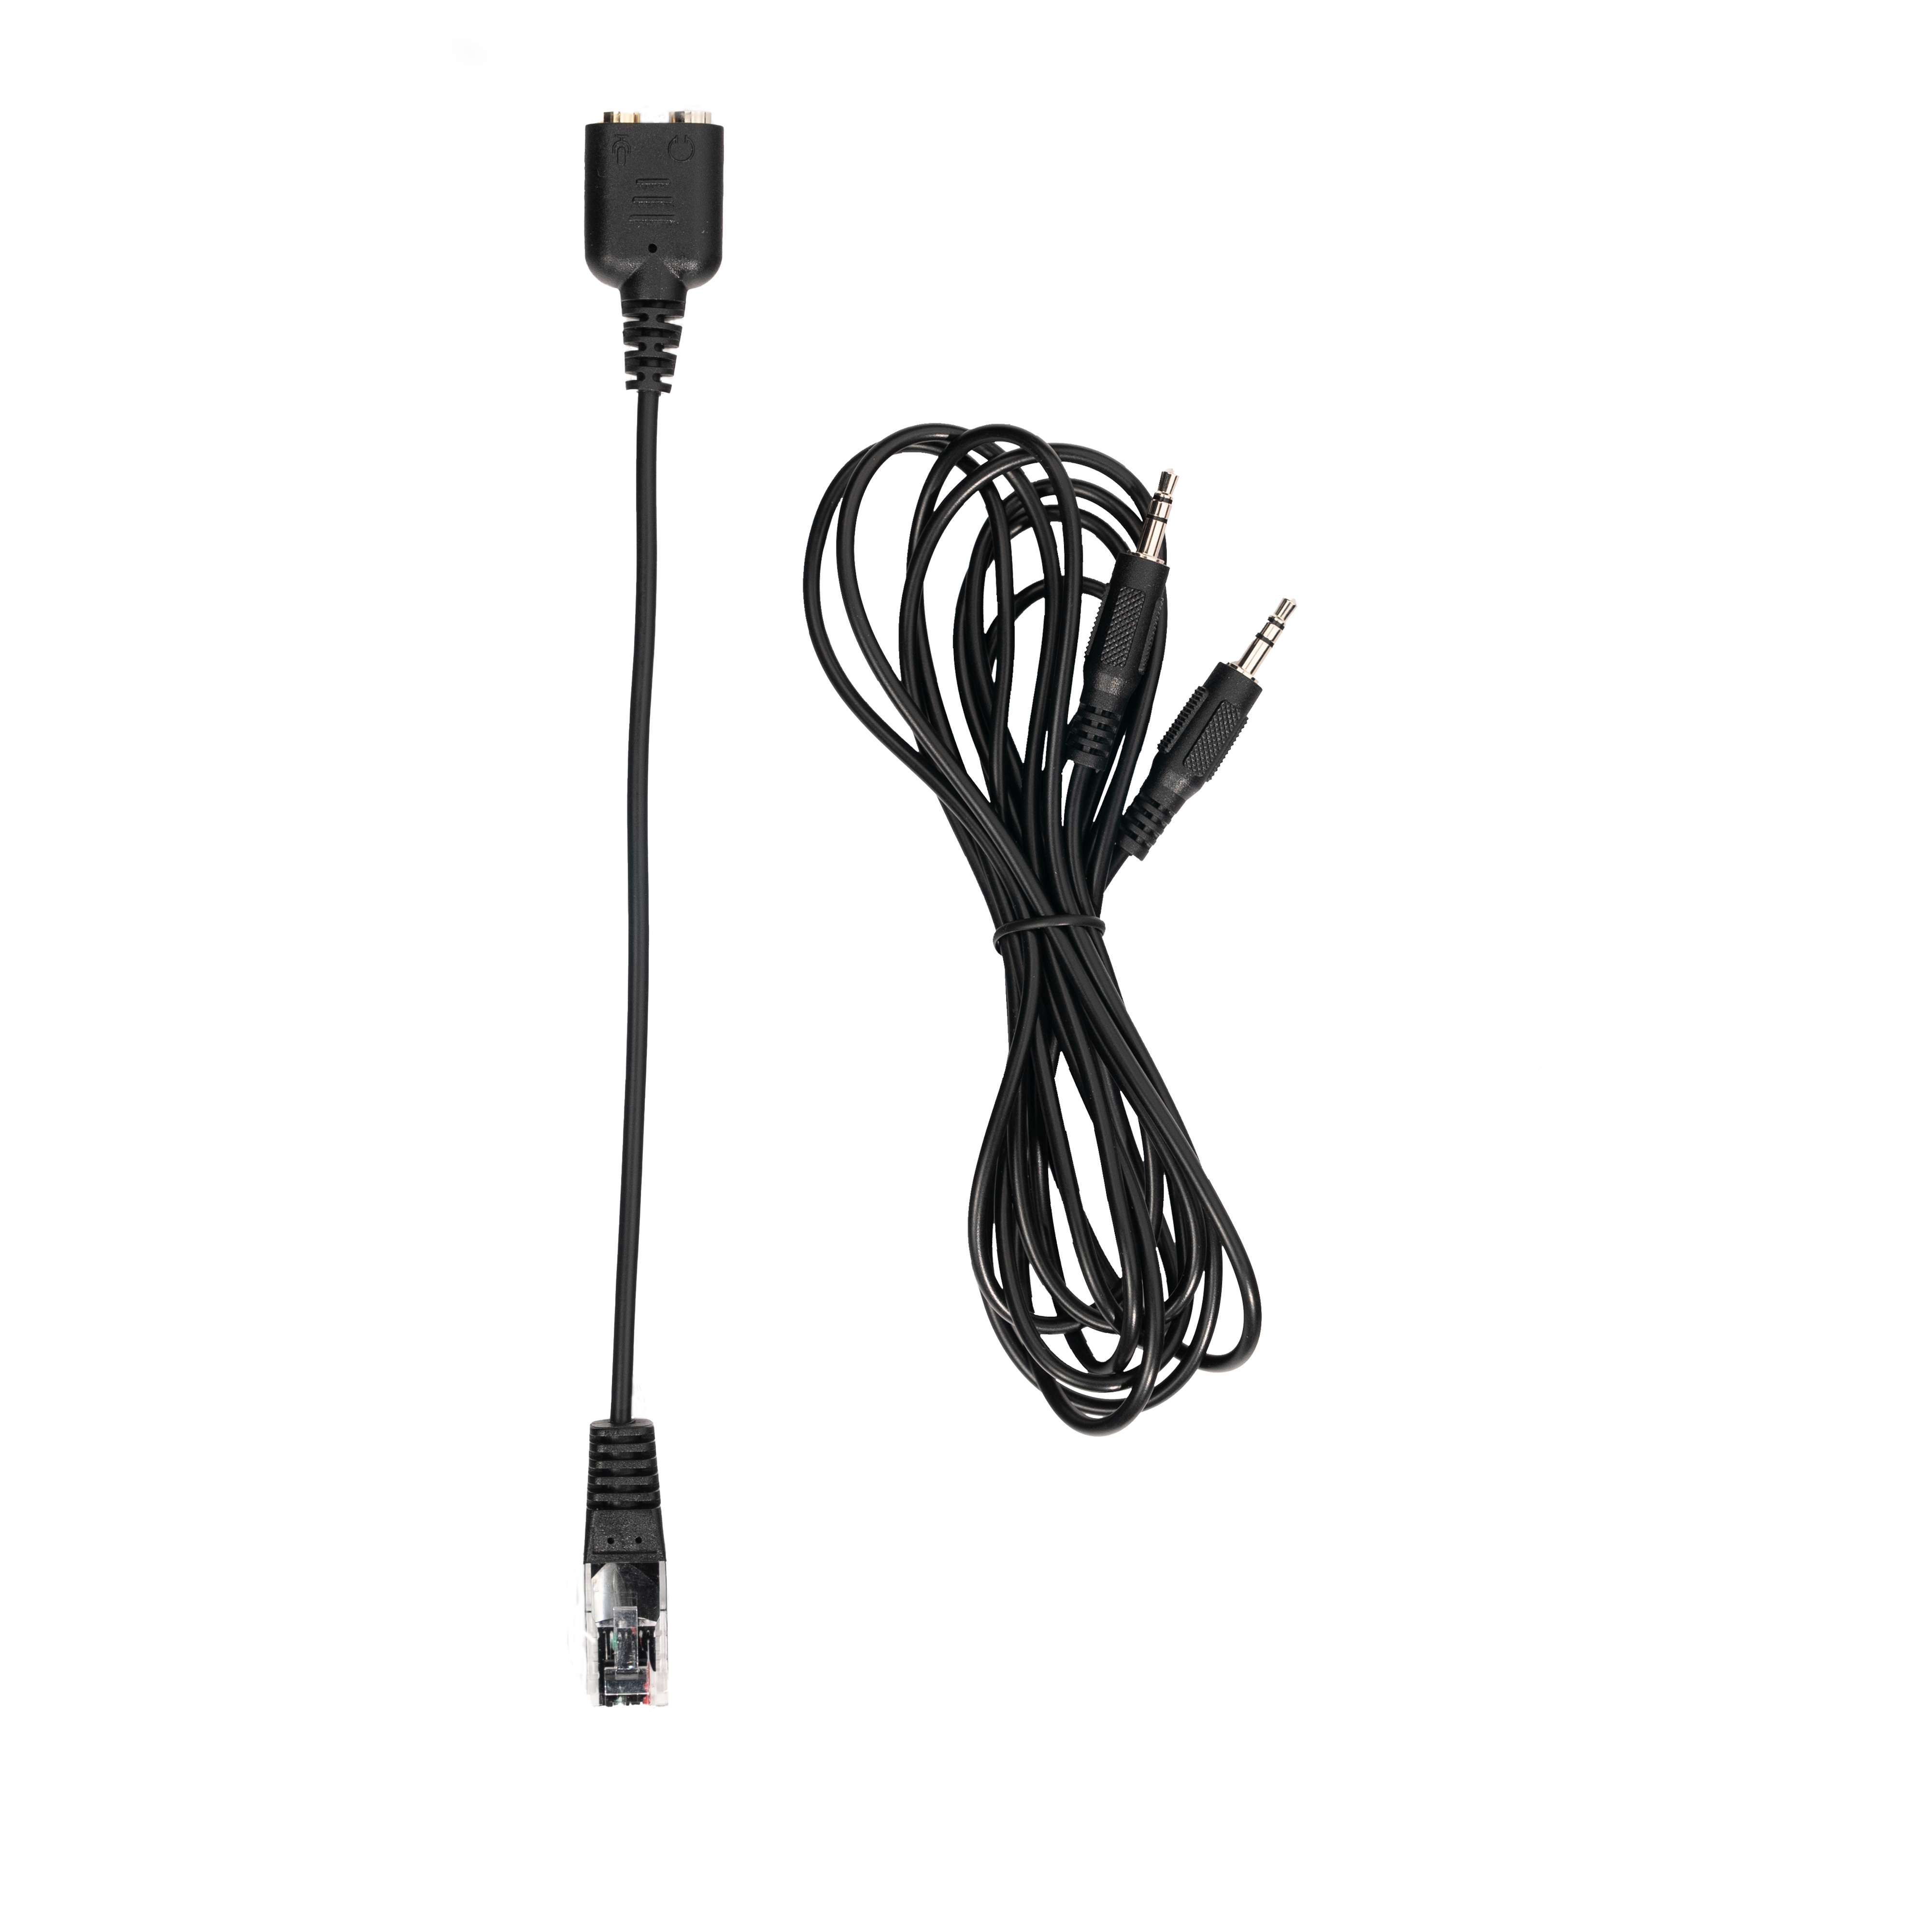 0-10v Dual Interface Cable